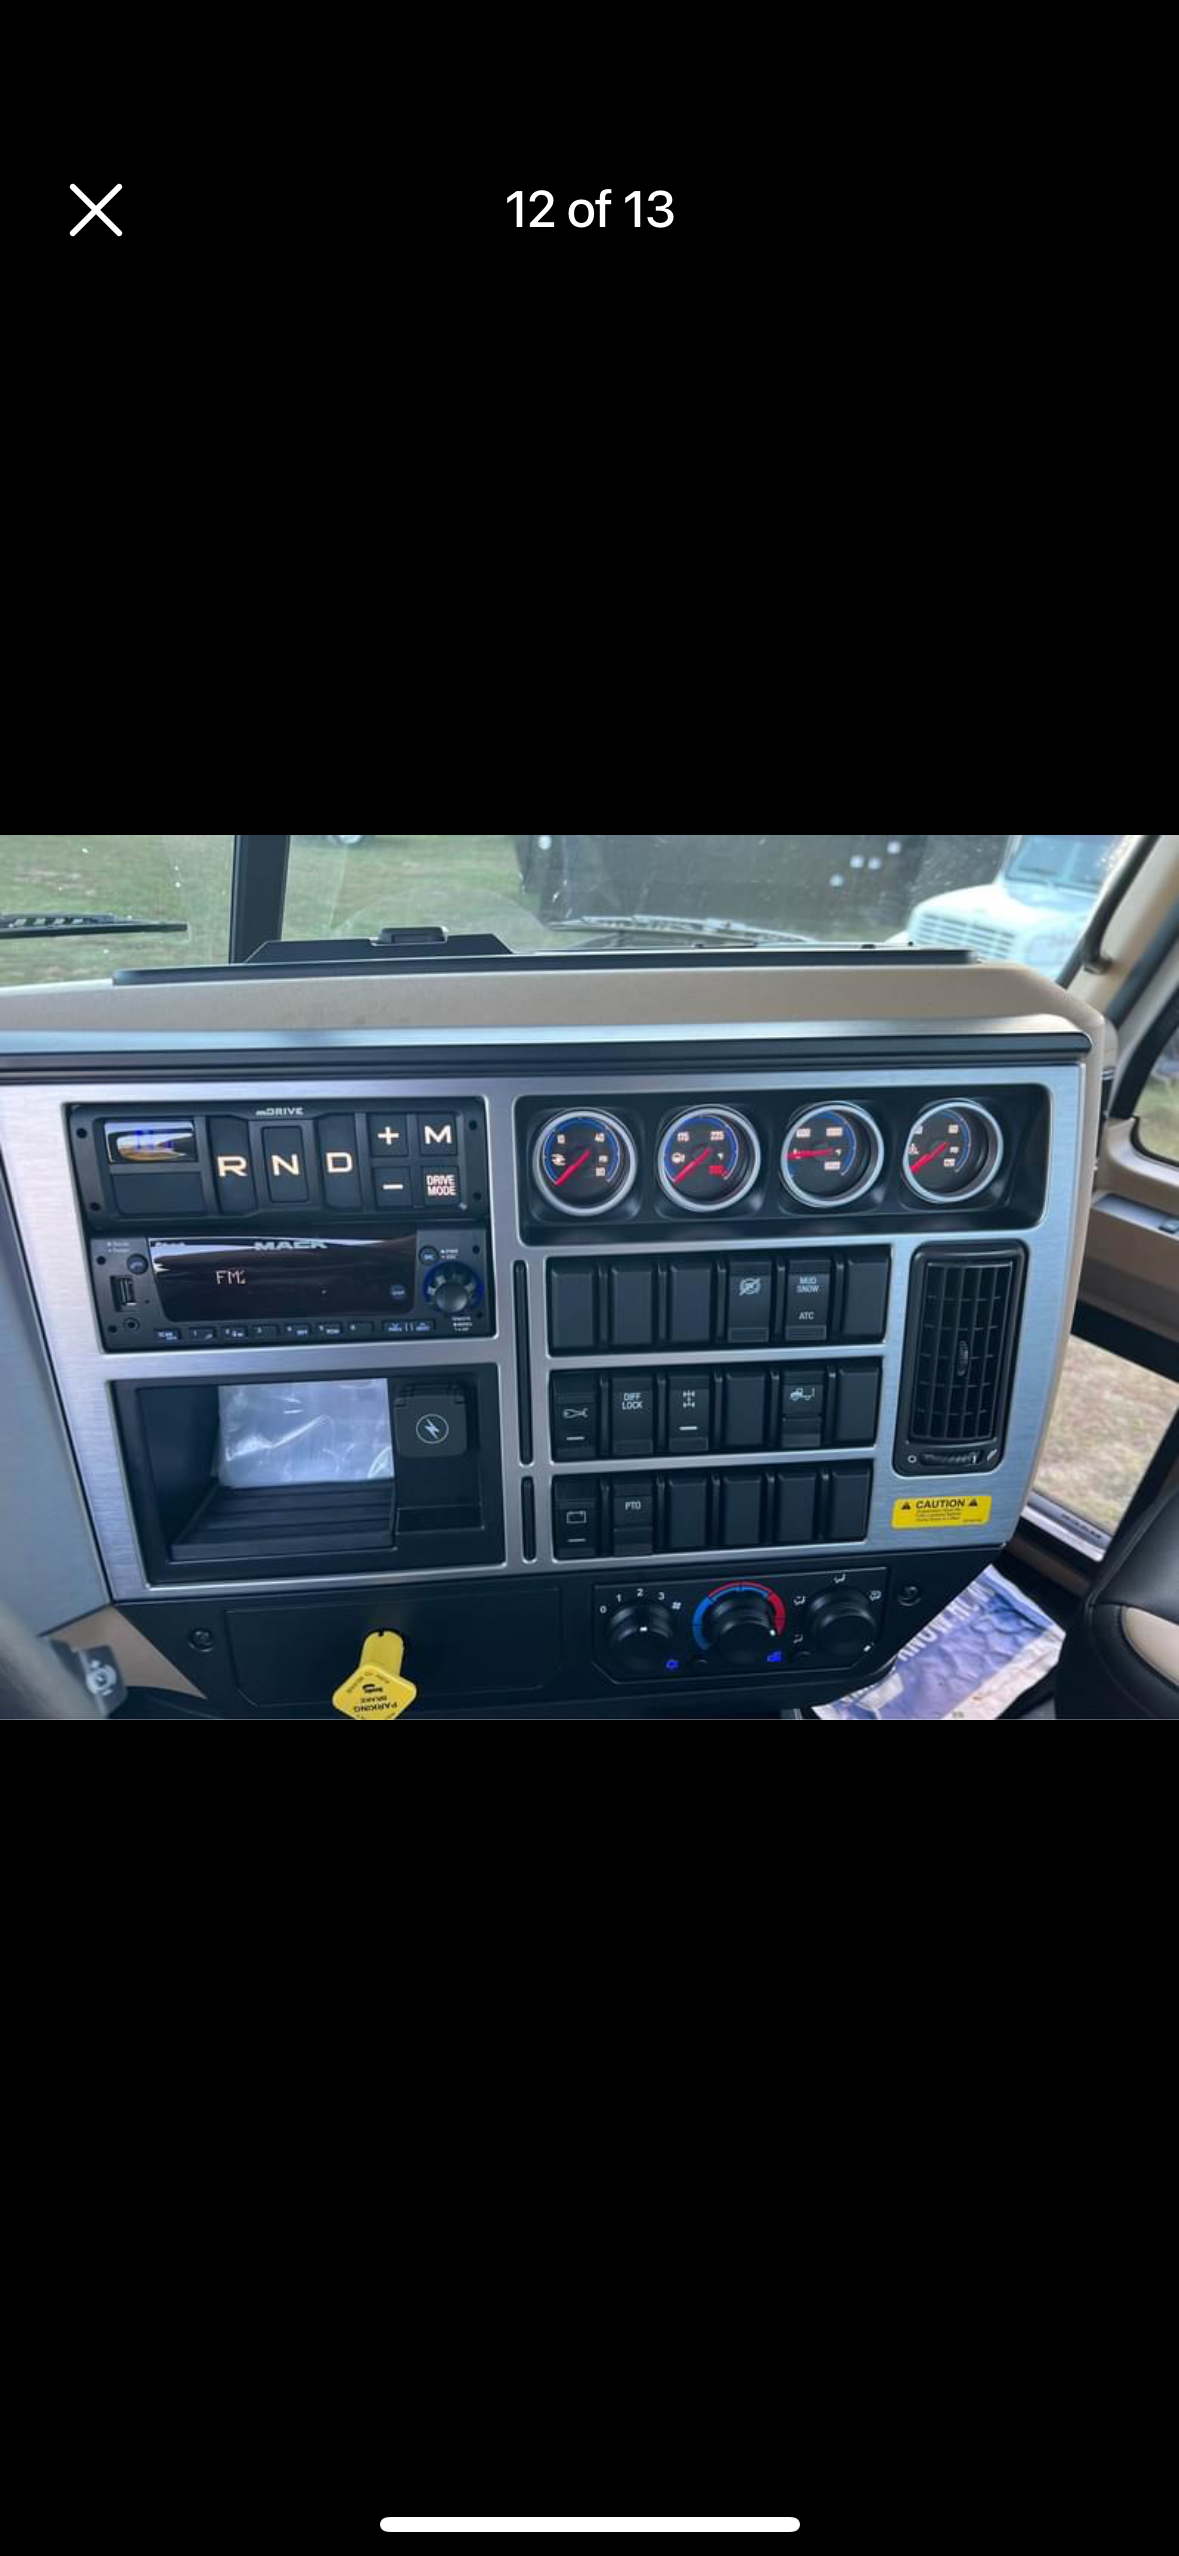 A picture of the dashboard of a truck.